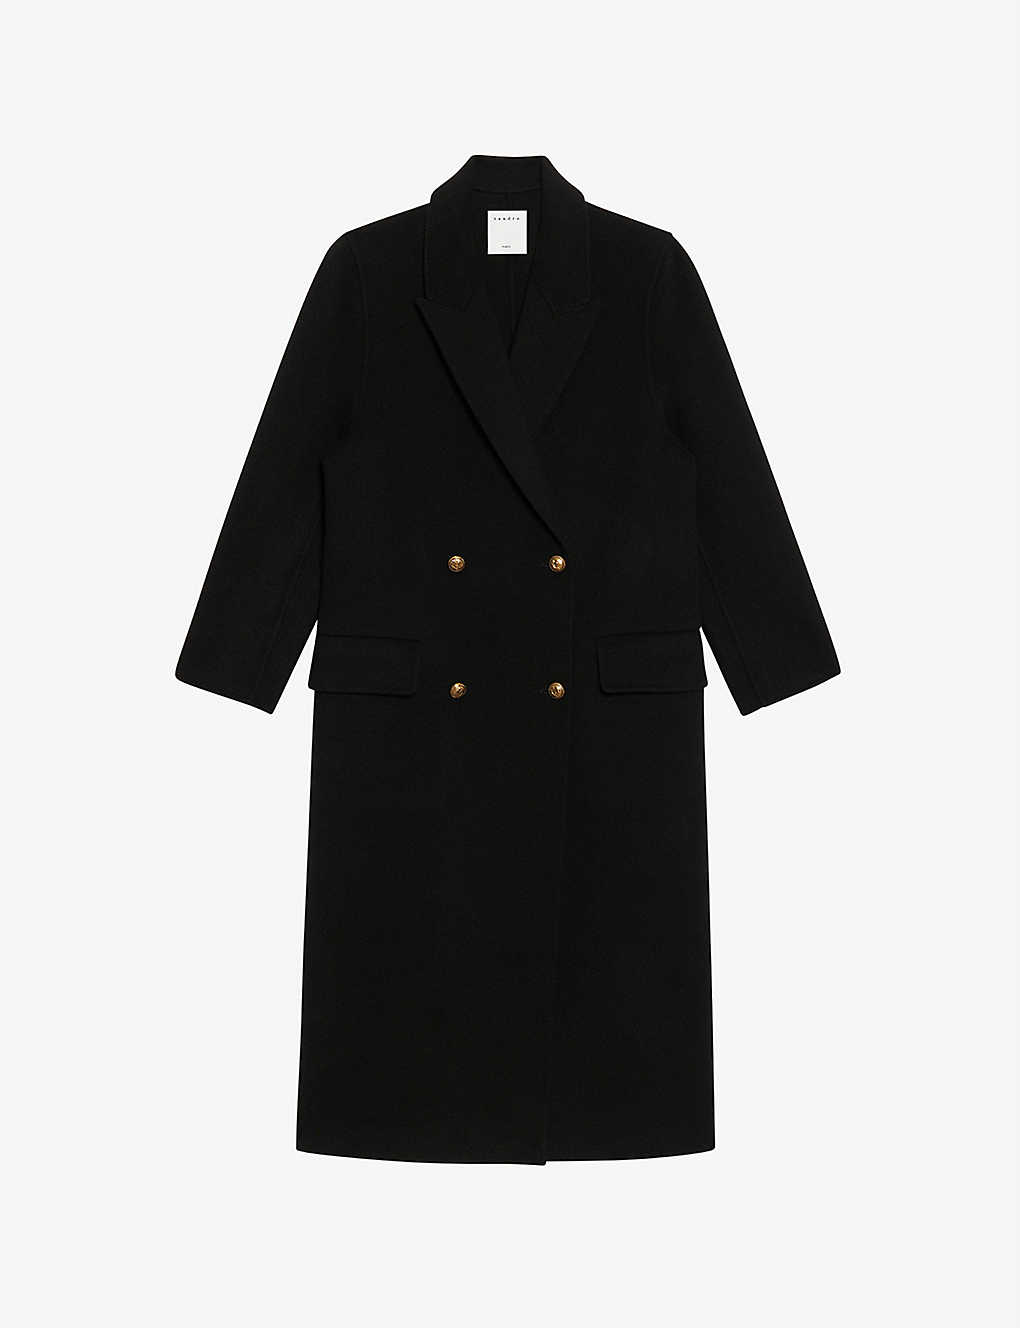 Mystere double-breasted wool coat(9421736)